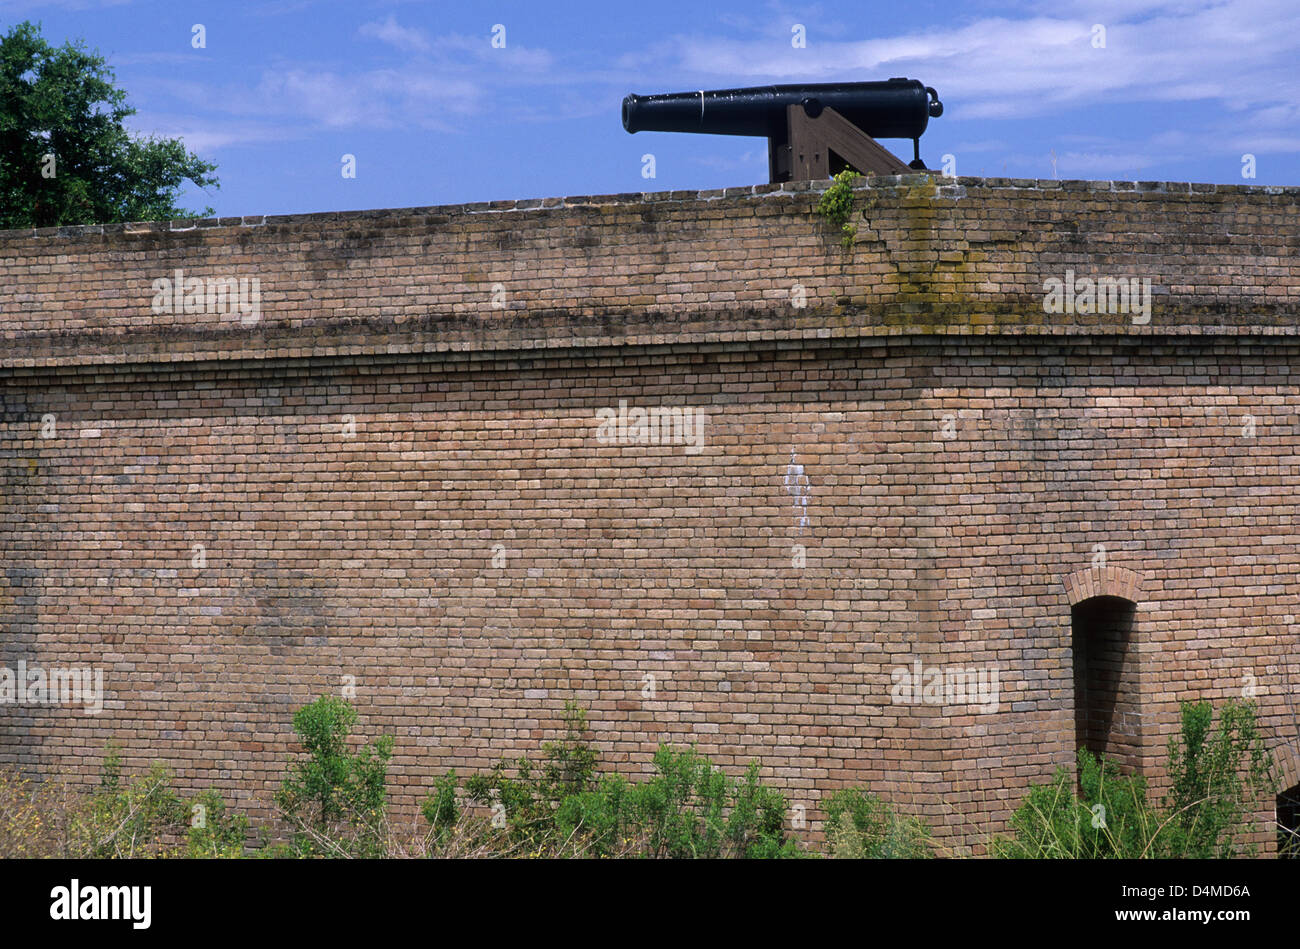 Il cannone, Fort Gaines Historic Site, Dauphin Island, Alabama Foto Stock